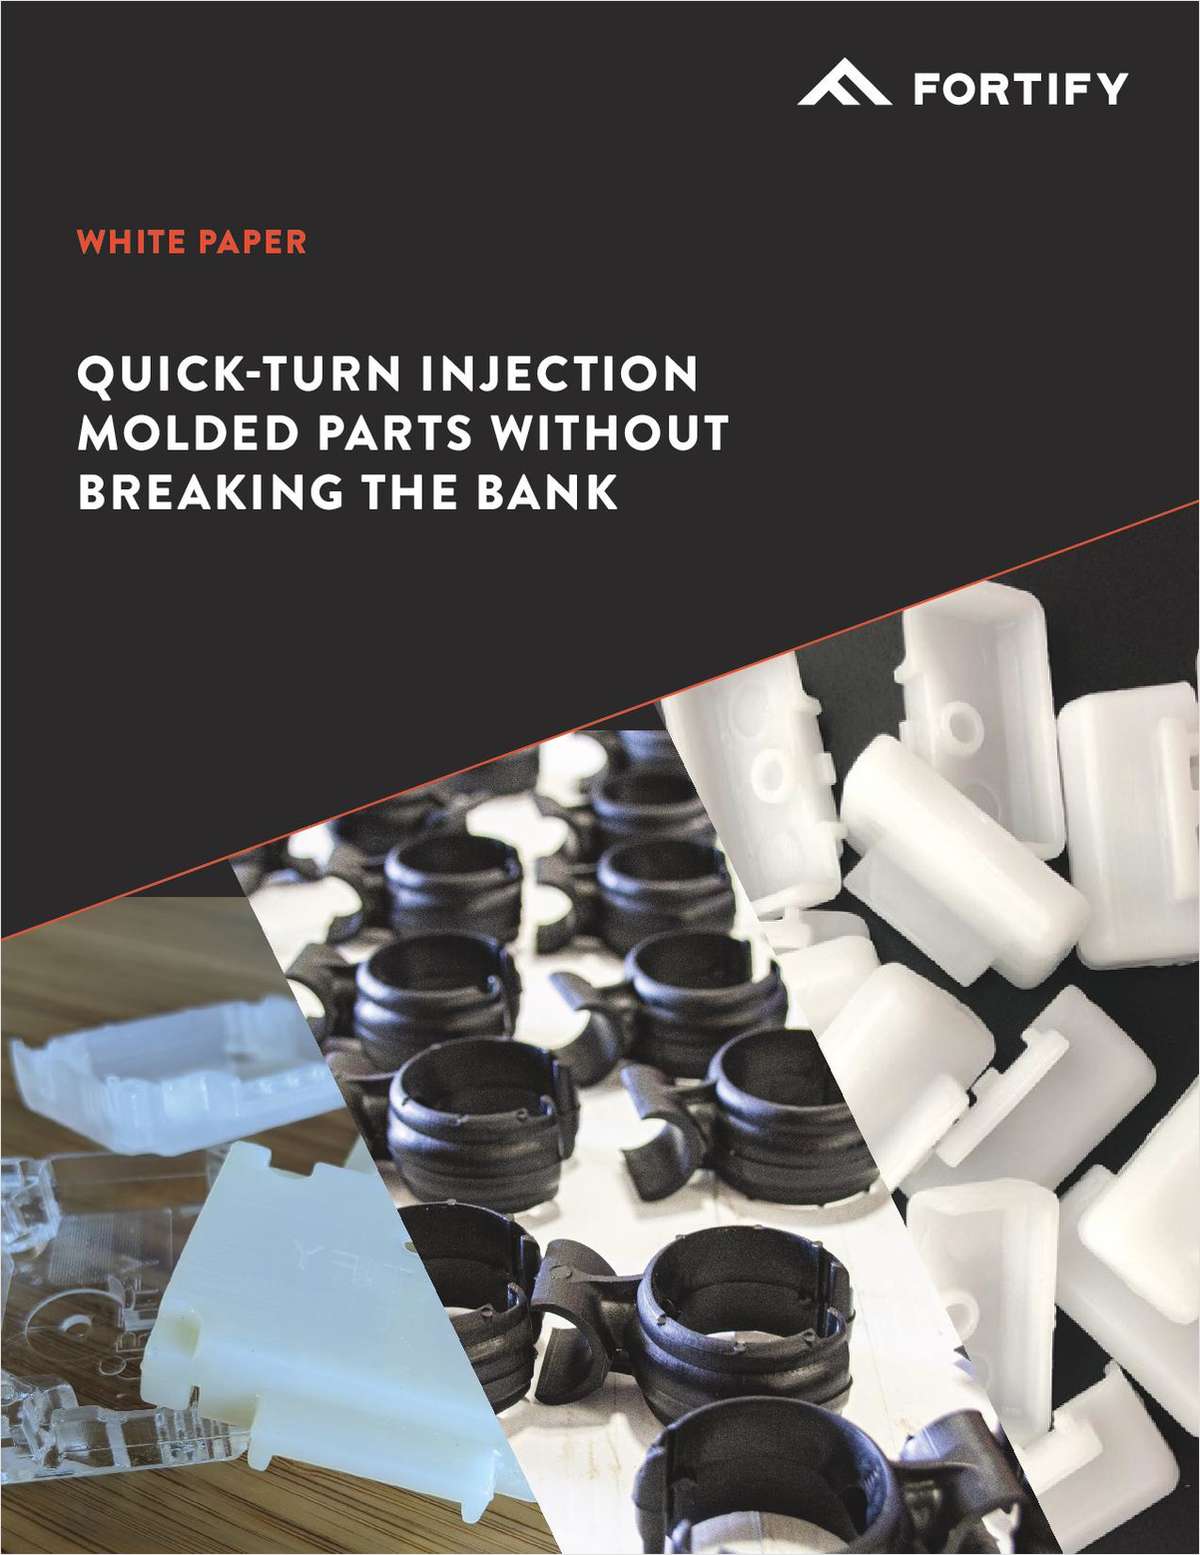 How to Get Quick-Turn Injection Molded Parts 'Without Breaking the Bank'